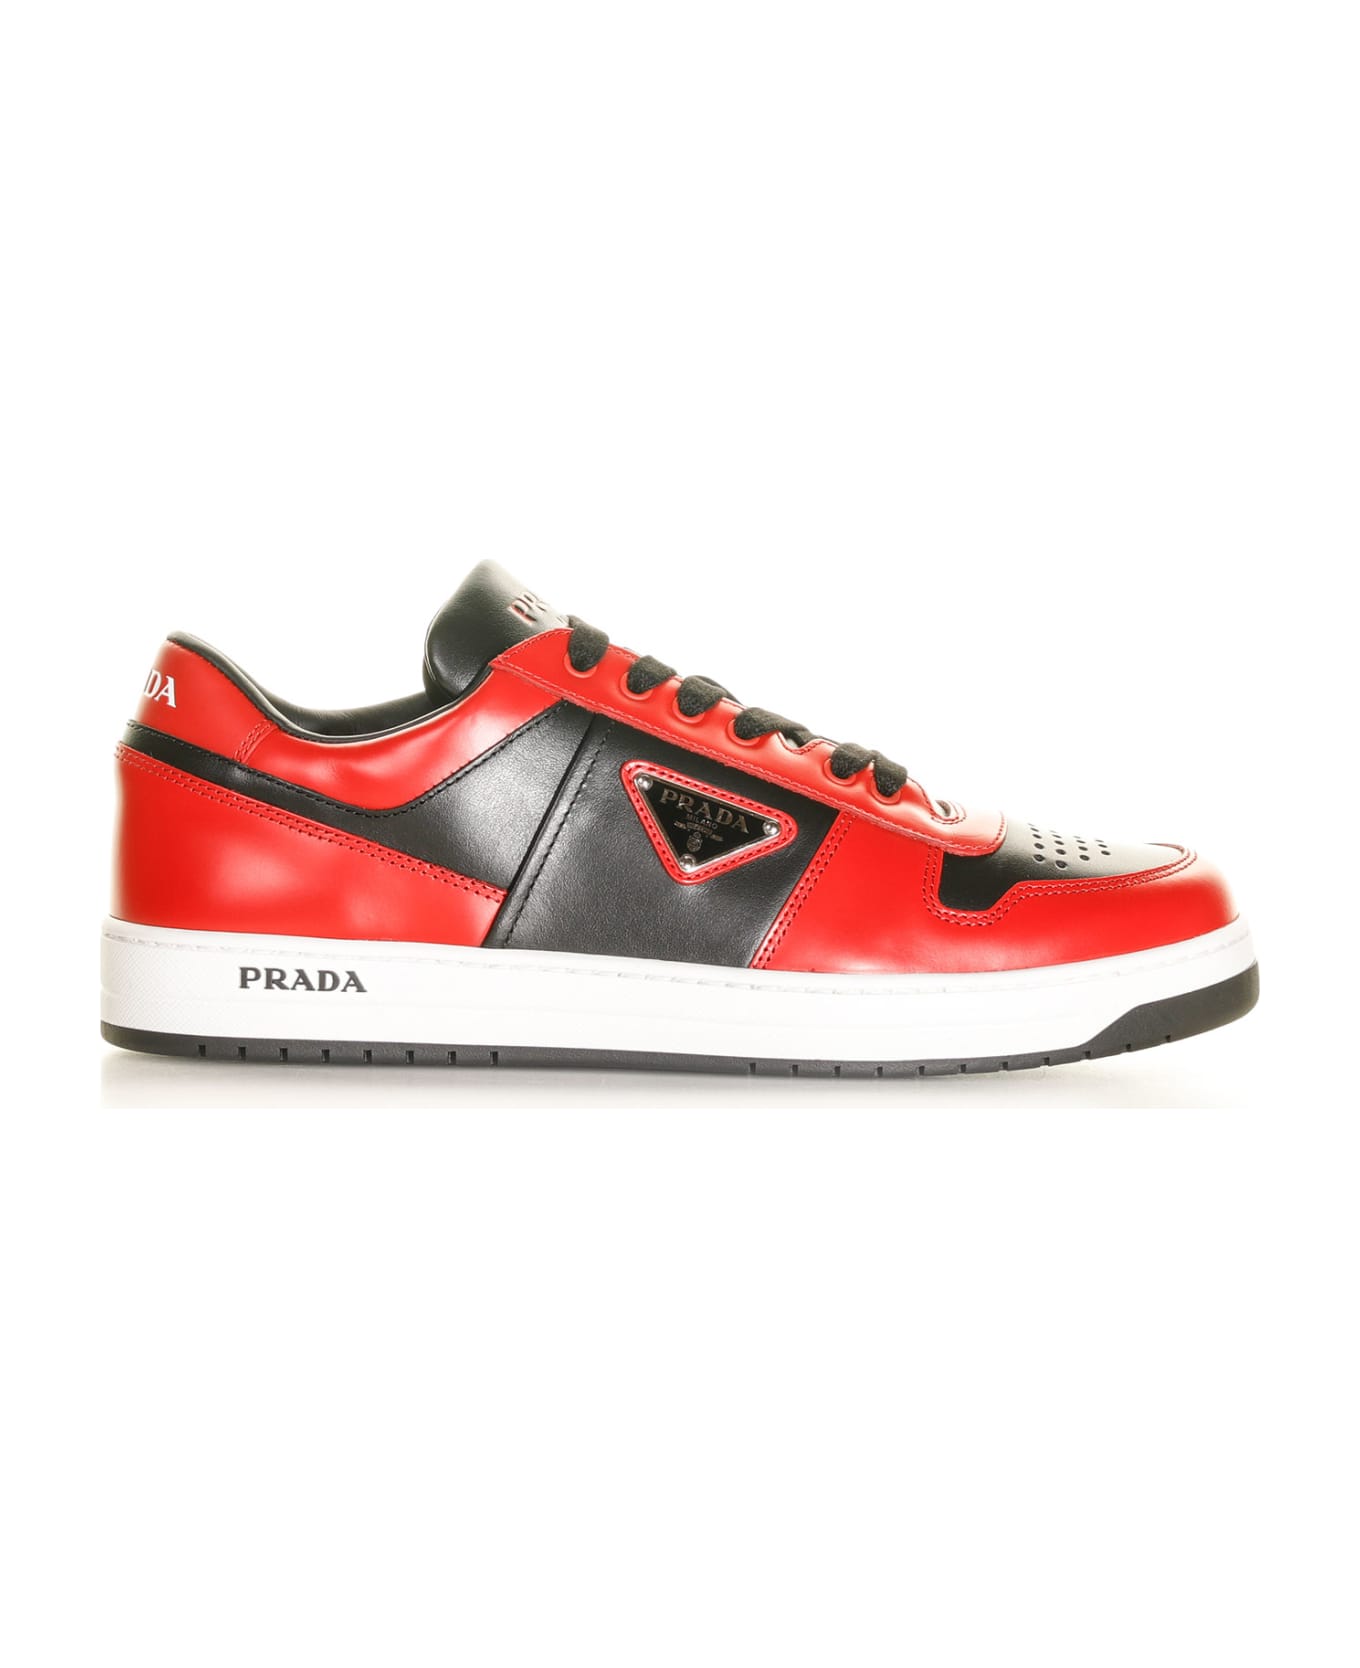 Prada Downtown Sneakers In Leather - NERO+LACCA